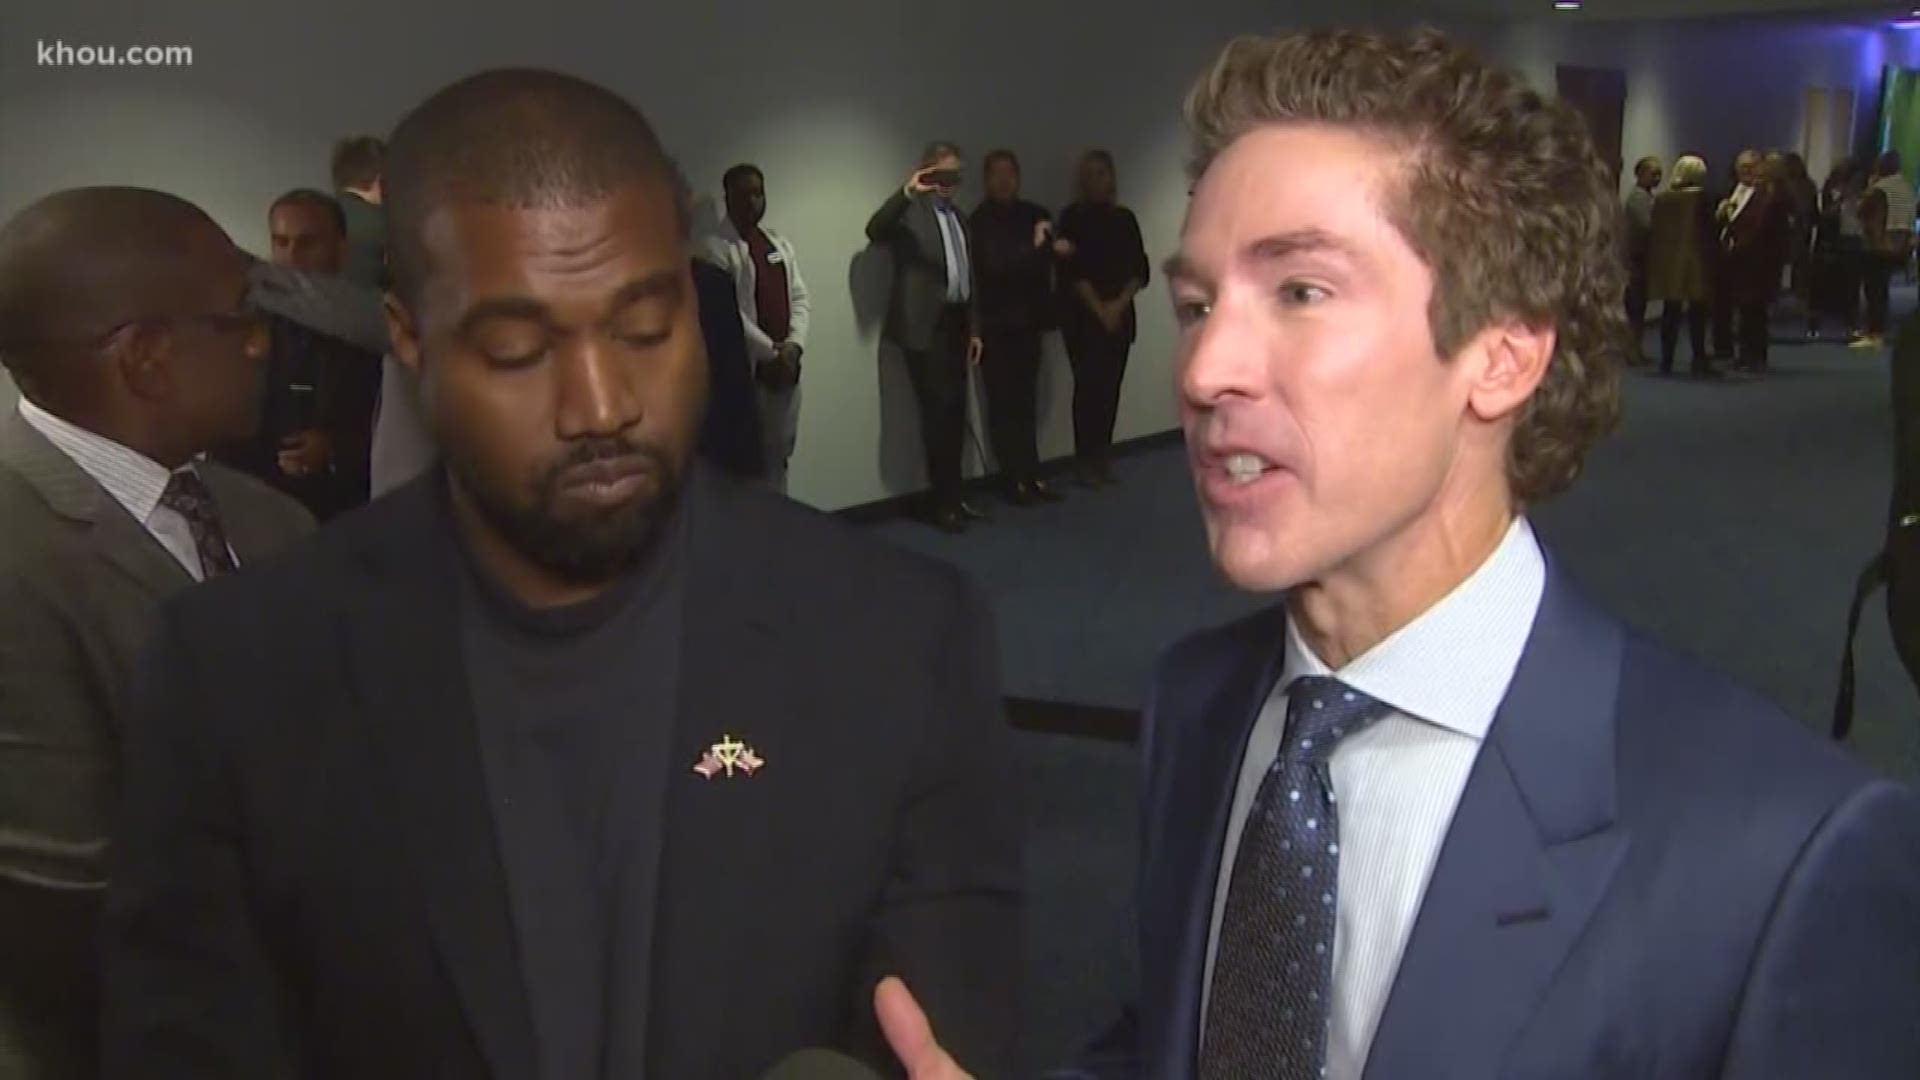 Pastor Joel Osteen and rap superstar Kanye West will reprise their recent Lakewood performance on a much bigger stage in the new year.